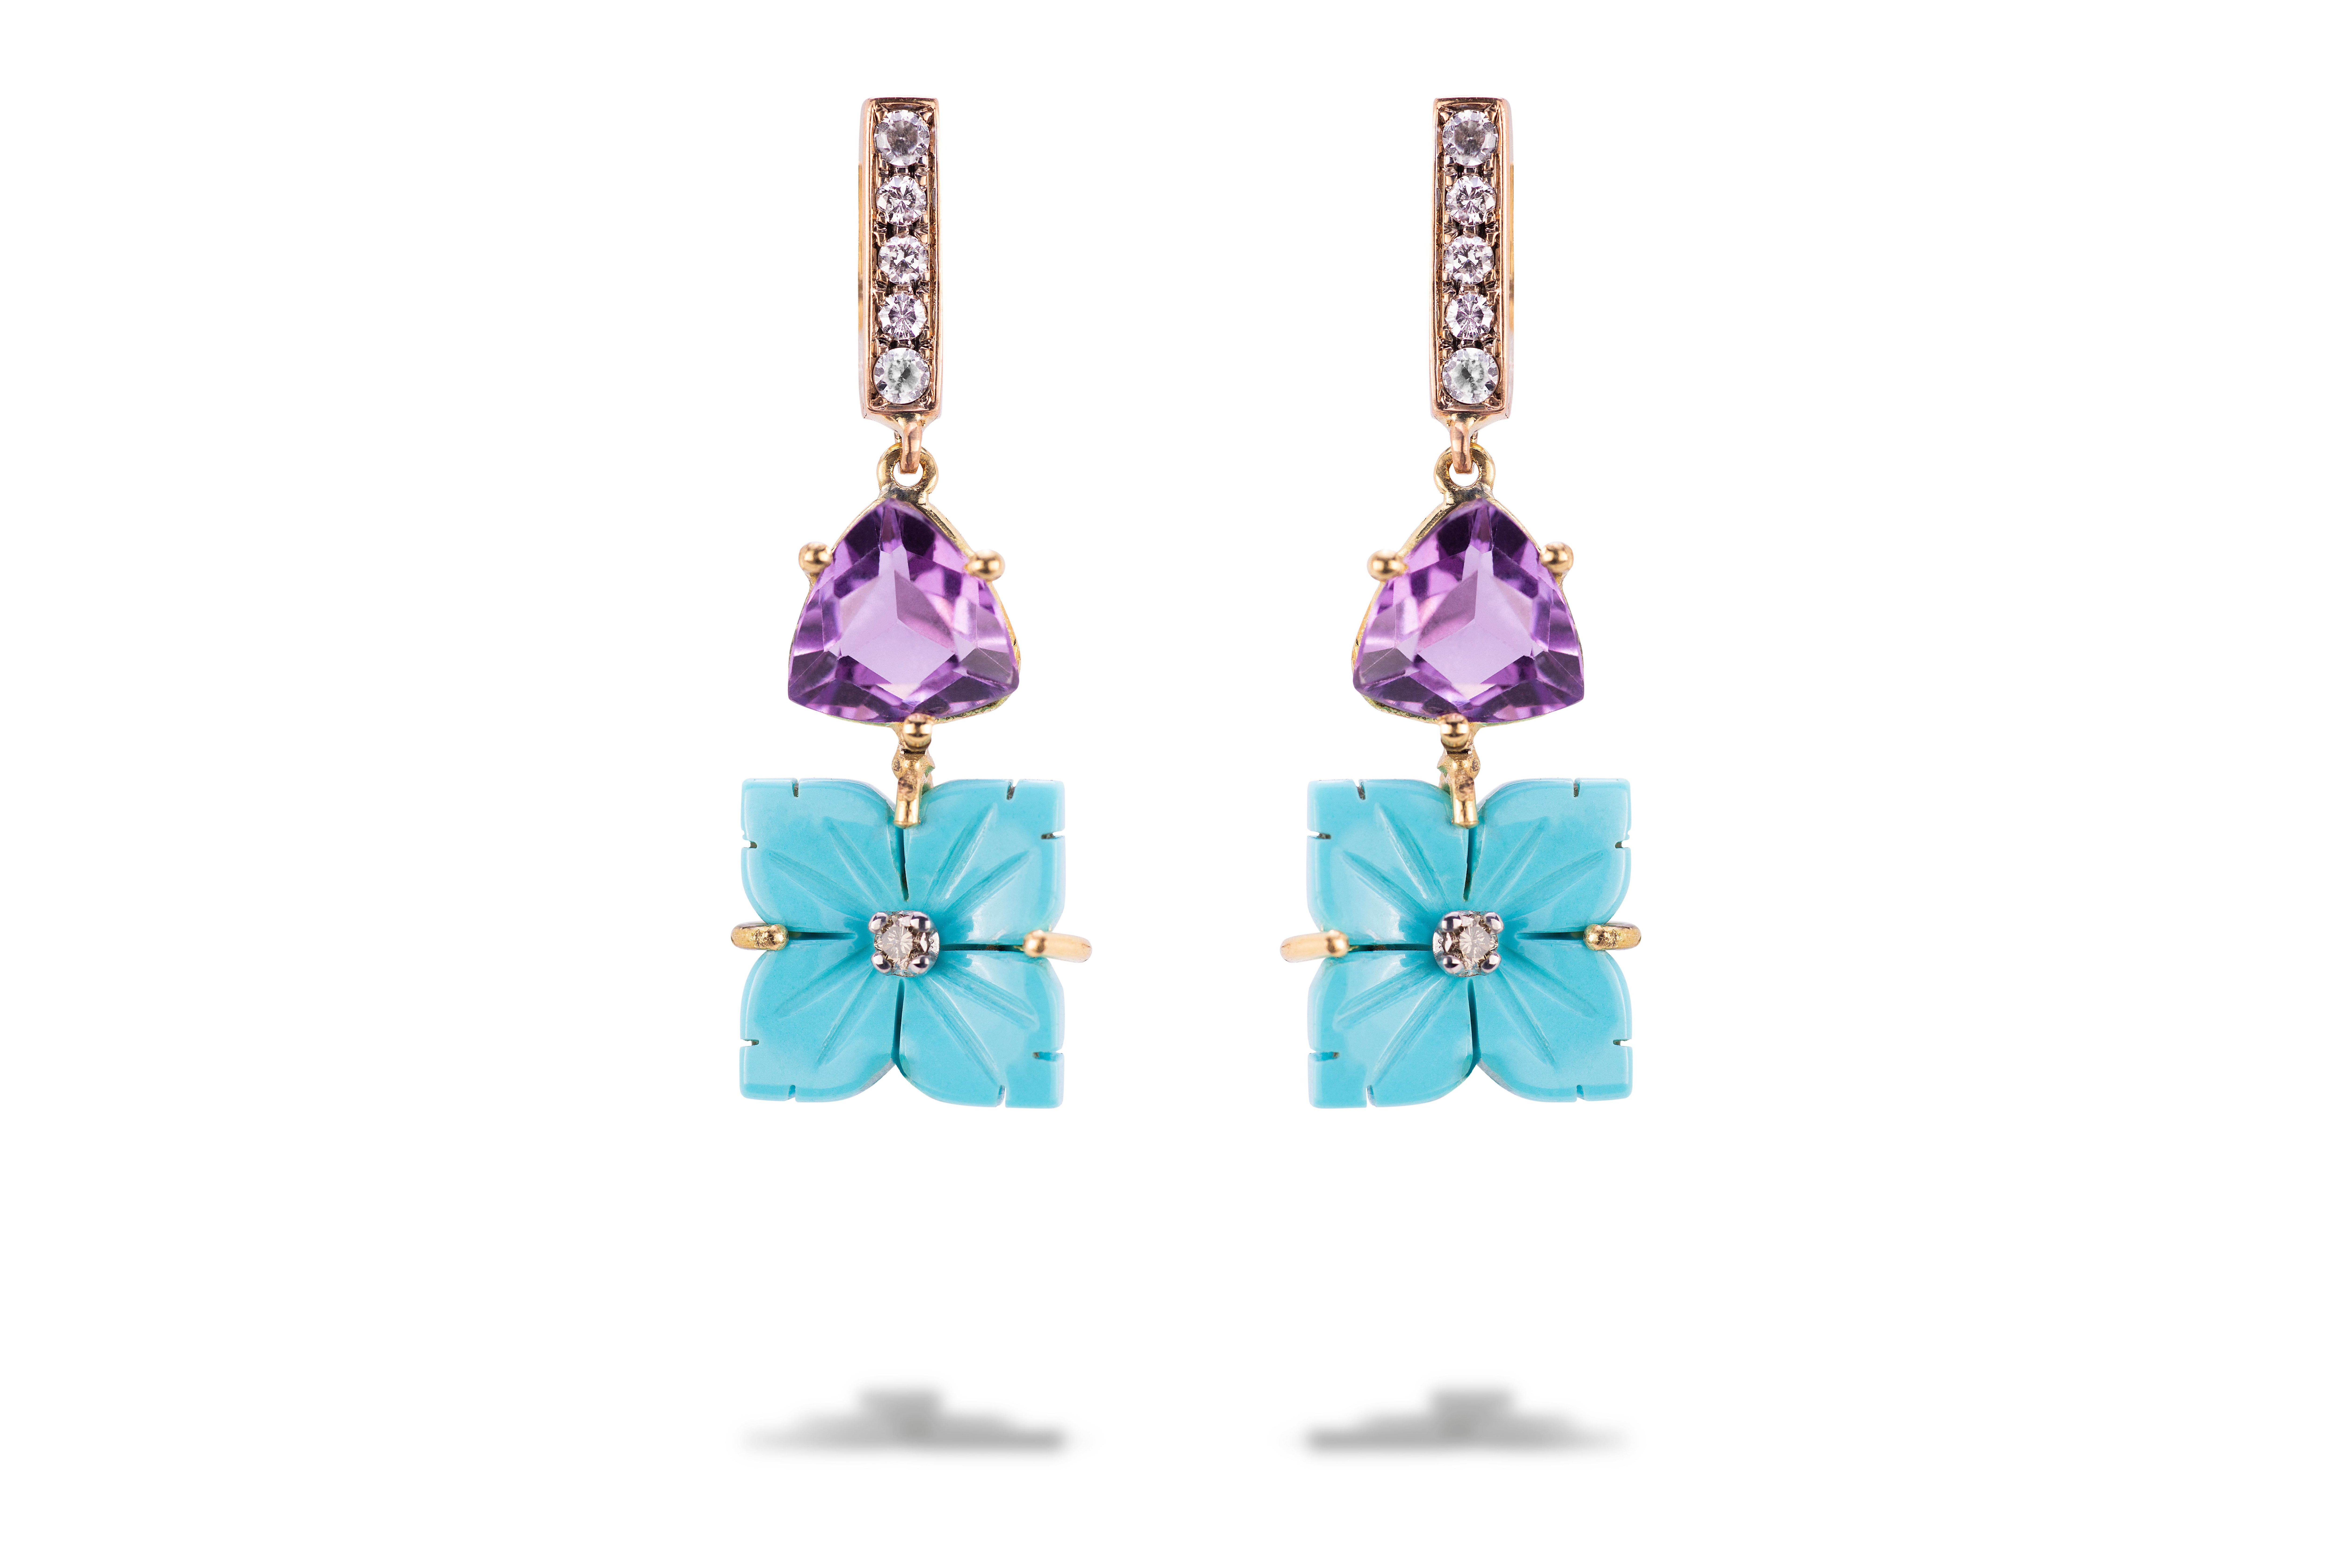 Rossella Ugolini 18K Gold Amethyst and Turquoise Floral Earrings